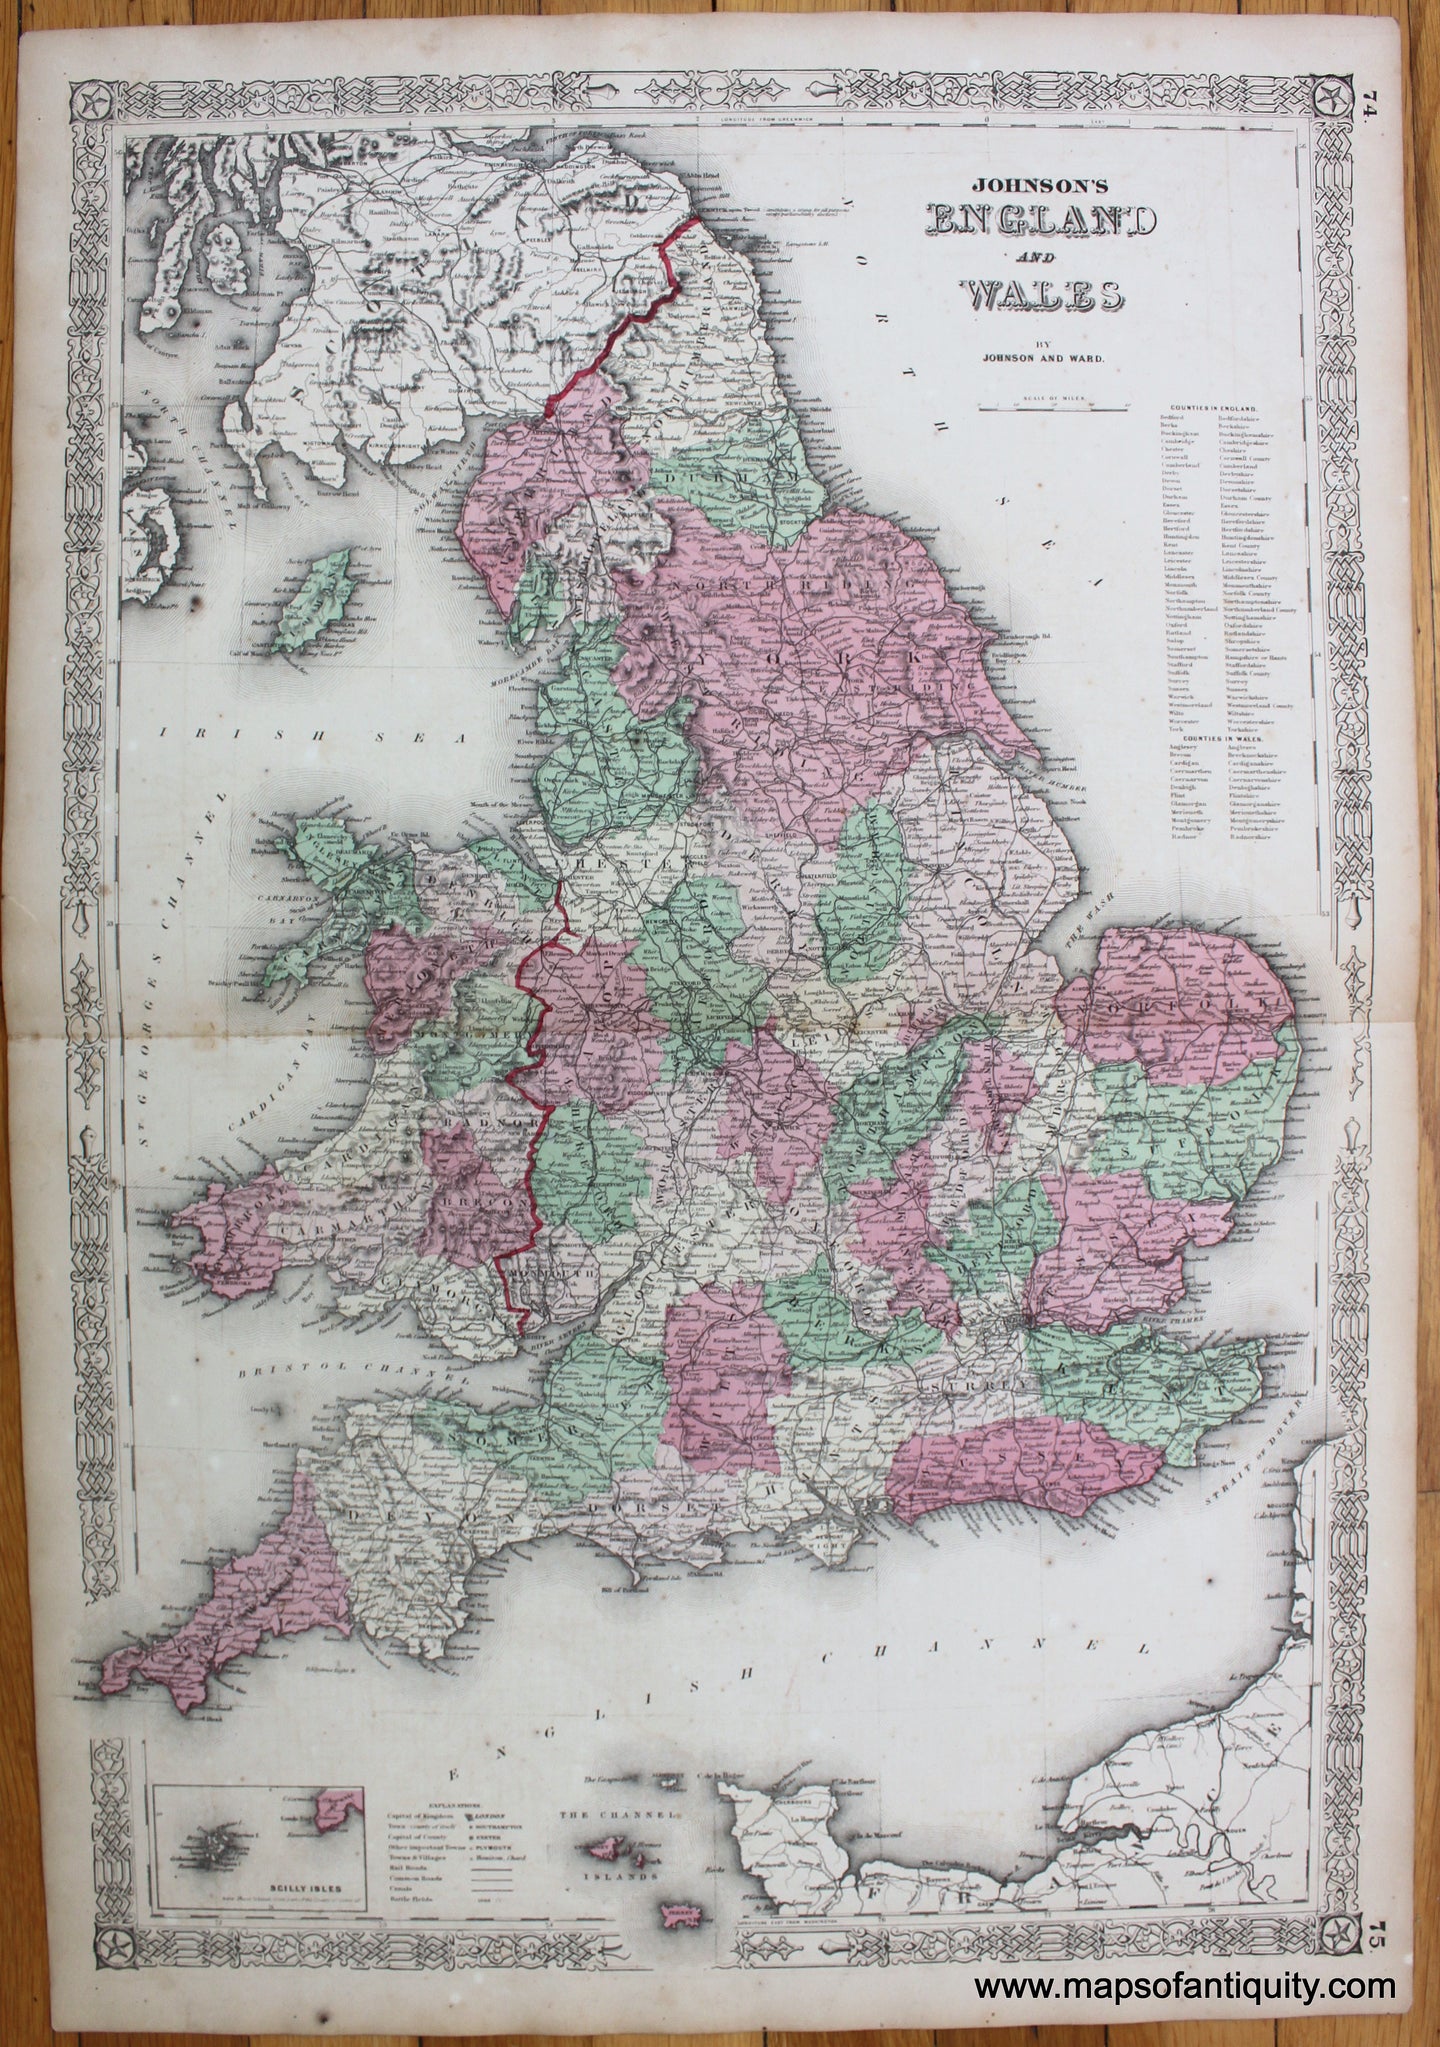 Antique-Hand-Colored-Map-Johnson's-England-and-Wales-1864-Johnson-&-Ward-England-1800s-19th-century-Maps-of-Antiquity